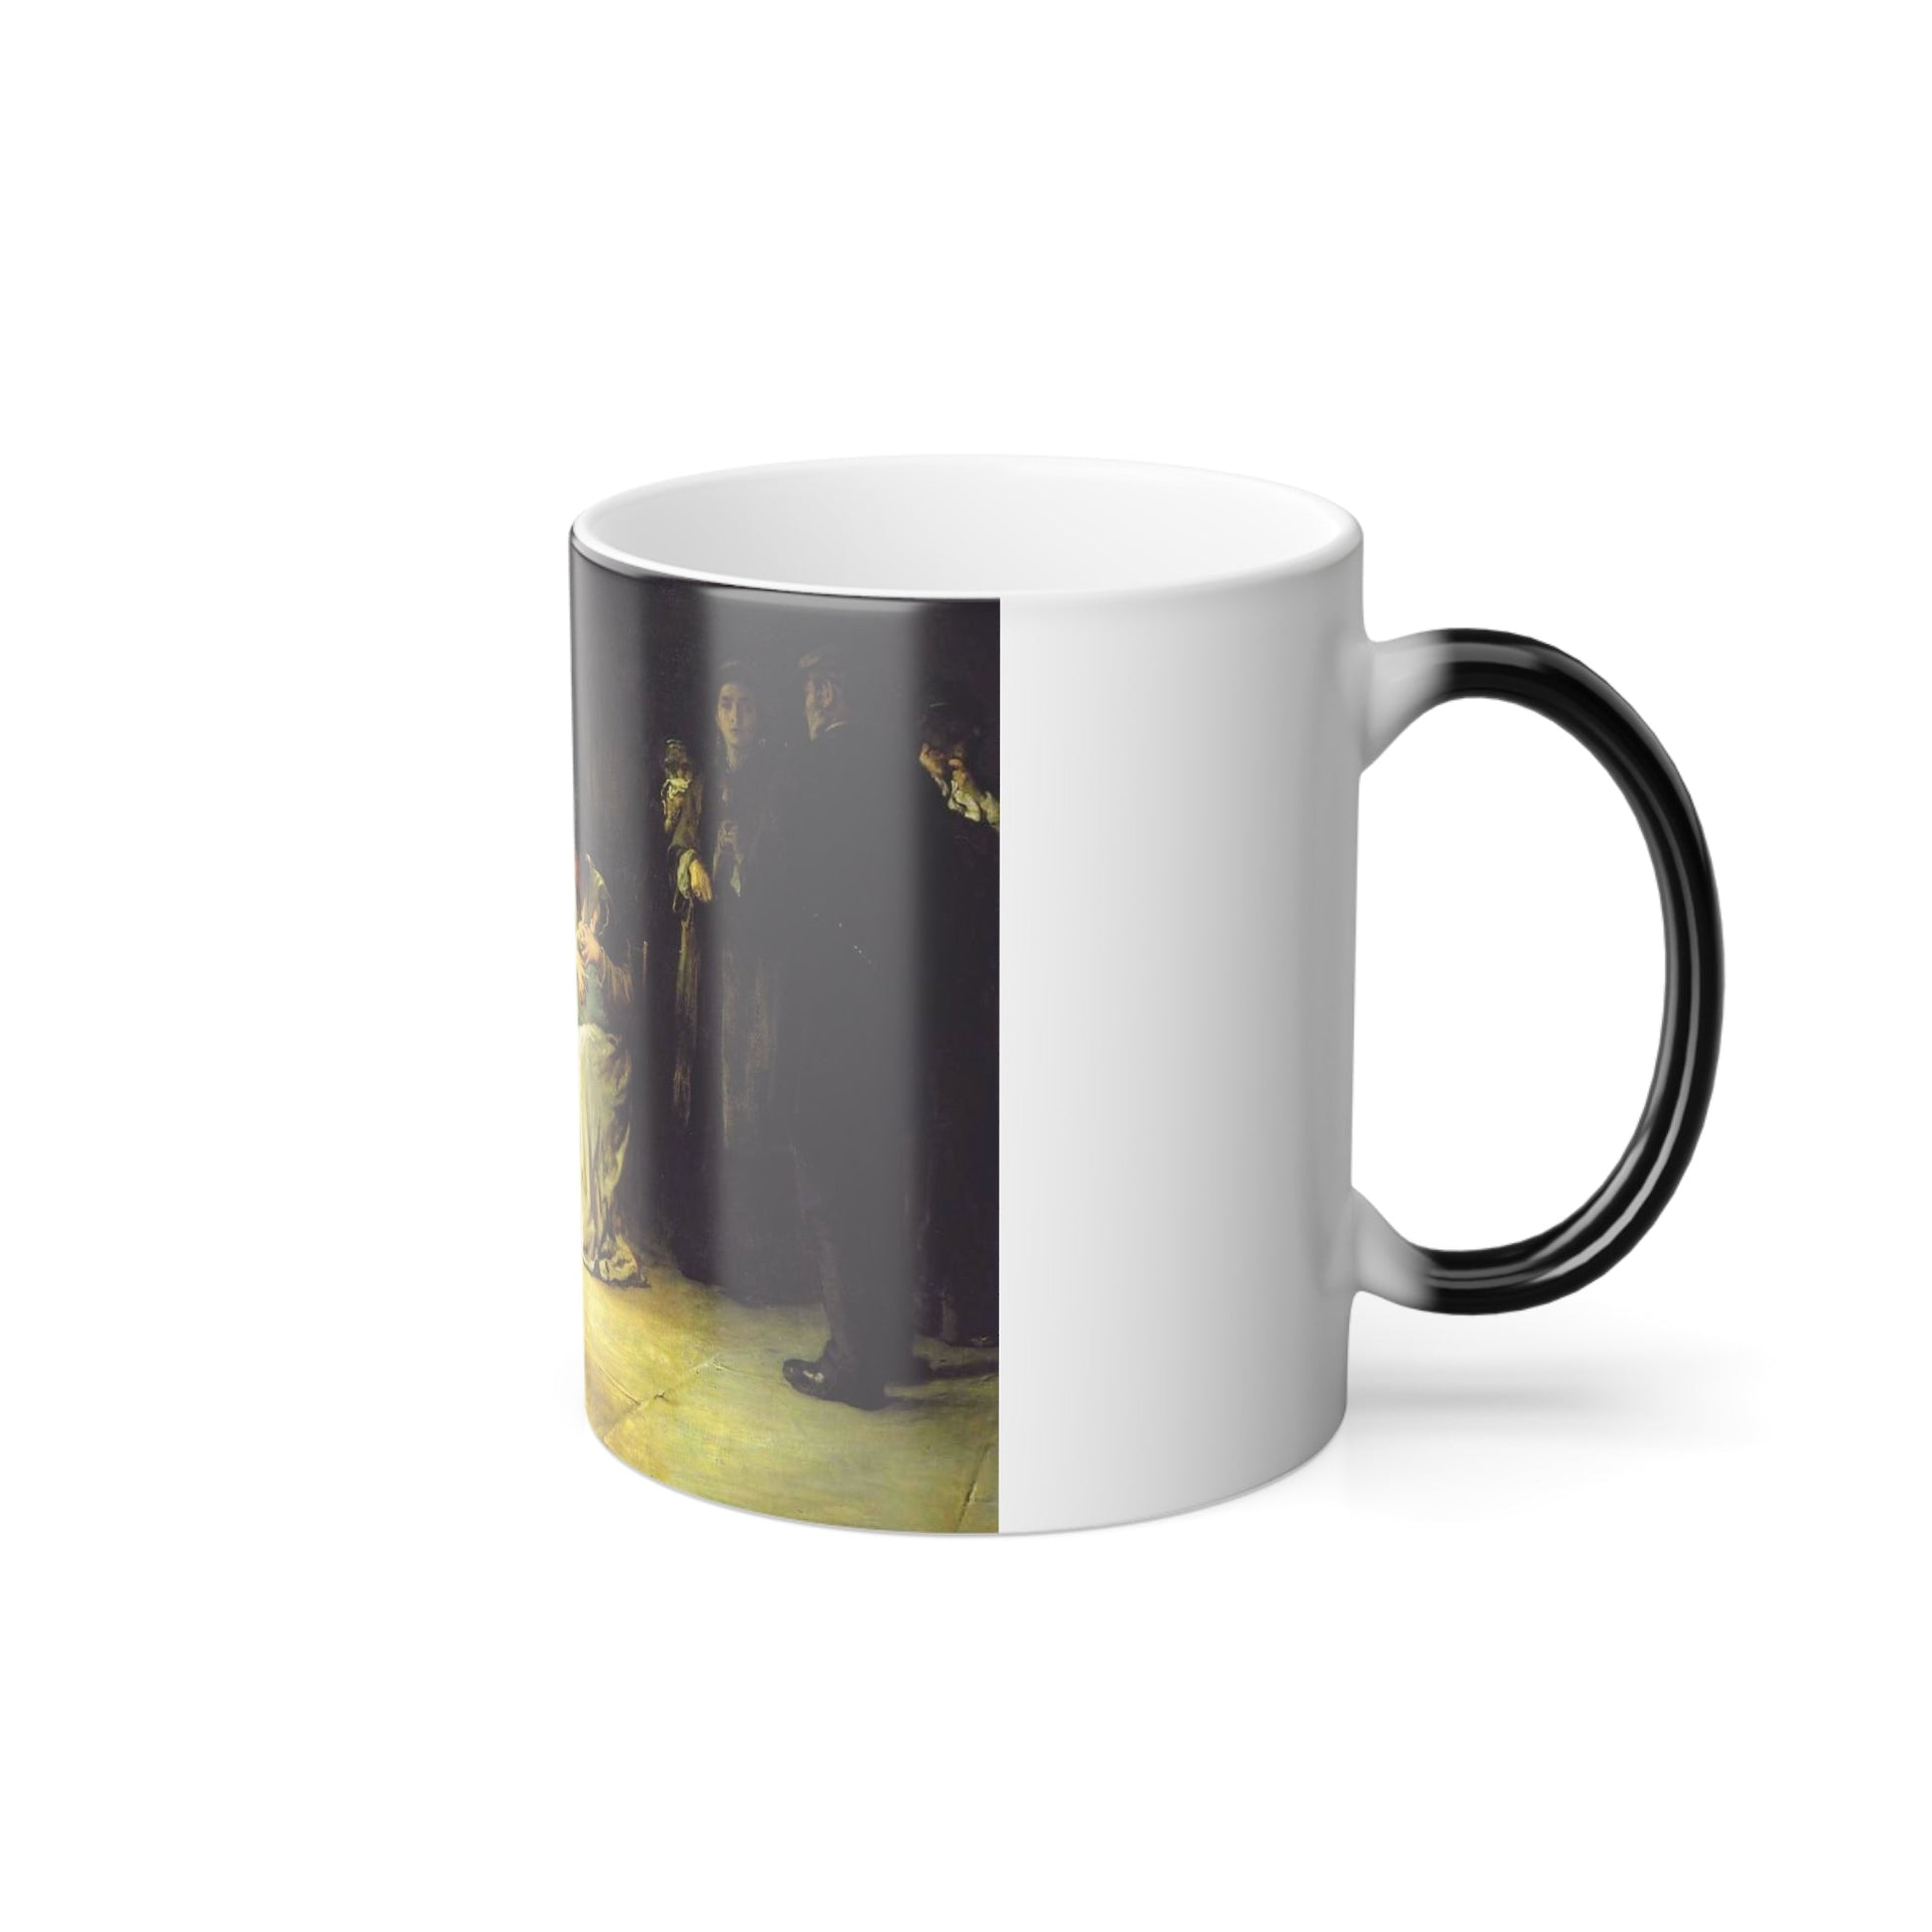 Francis Montague Holl (1845-1888) Newgate - Committed for Trial - 1878 - Color Changing Mug 11oz-11oz-The Sticker Space